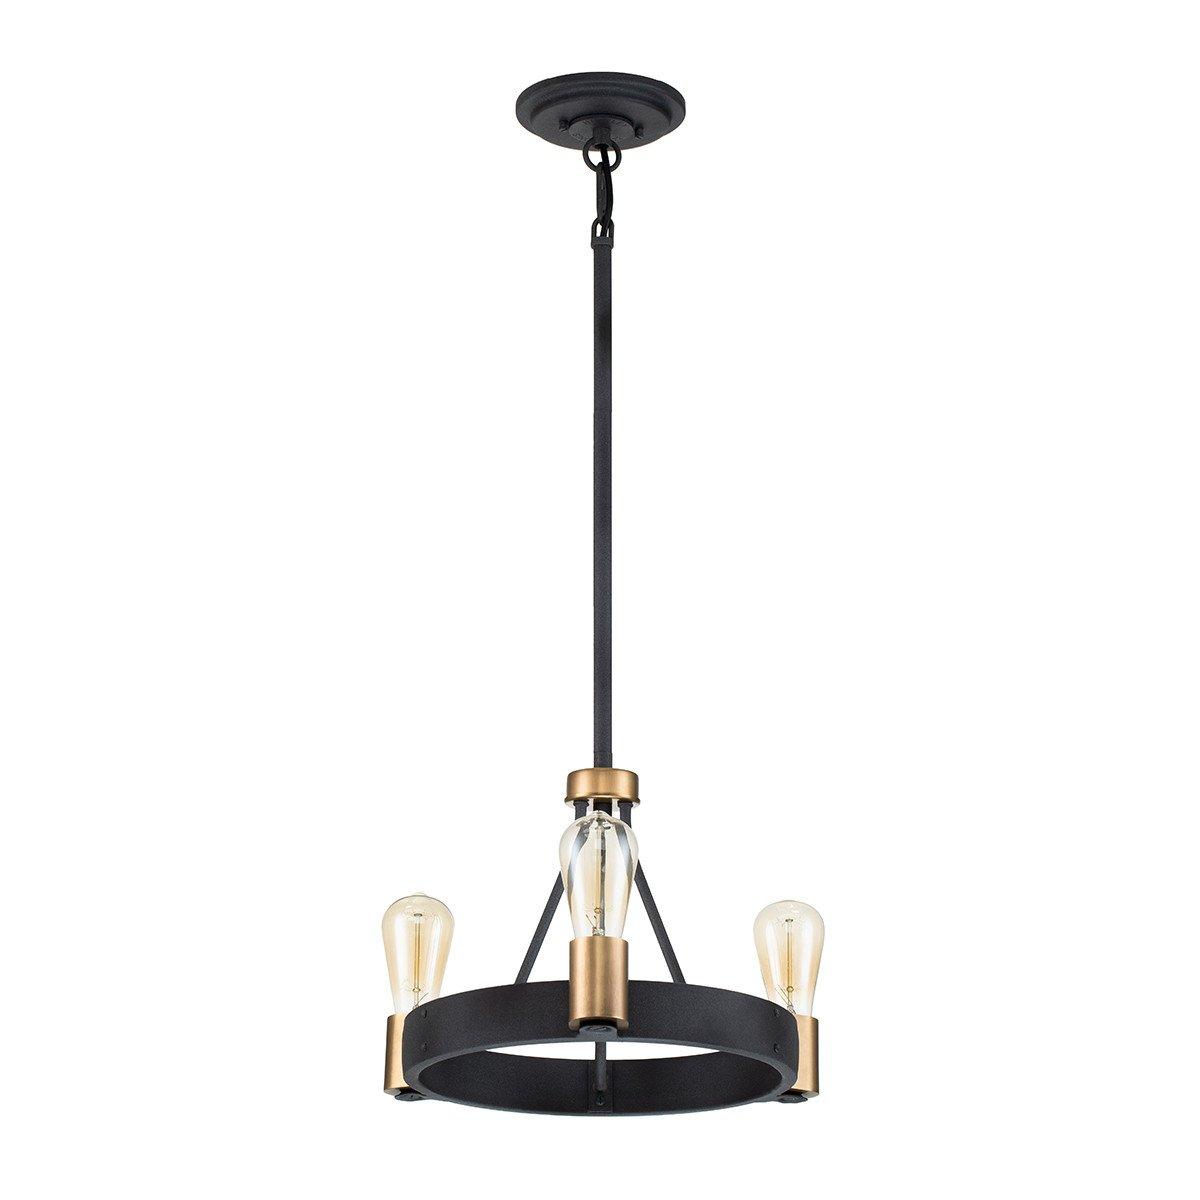 Hinkley Silas Cylindrical Pendant Ceiling Light Aged Zinc & Heritage Brass